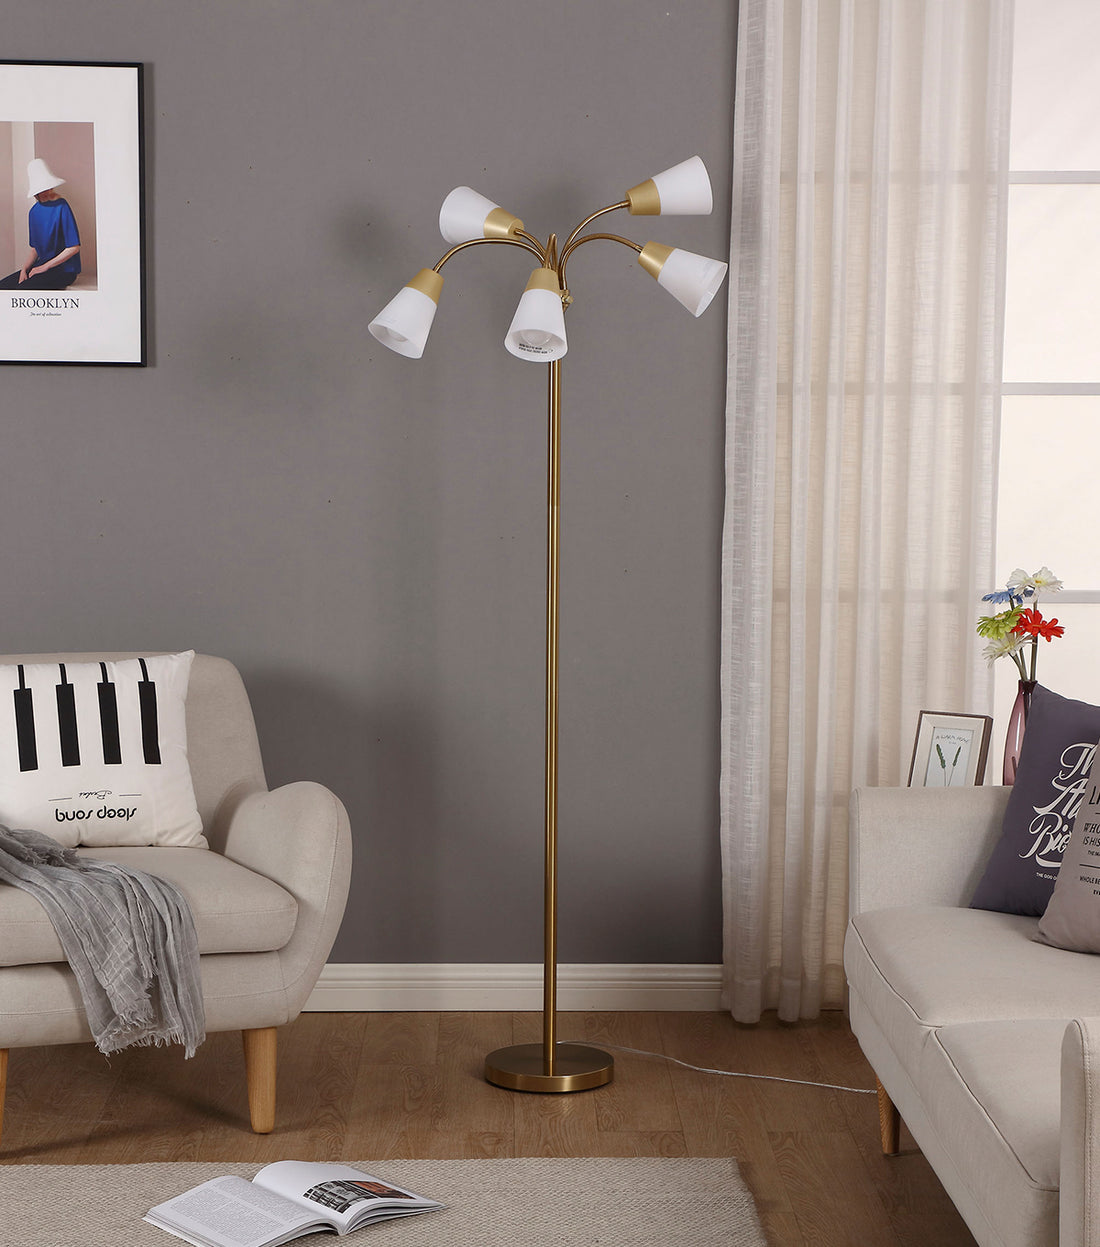 Brightech Medusa Modern LED Floor Lamp – Contemporary Multi Head Standing Reading Lamp for Living Room, Bedroom, Kids Room - Includes 5 LED Bulbs and 5 White & Colored Interchangeable Shades